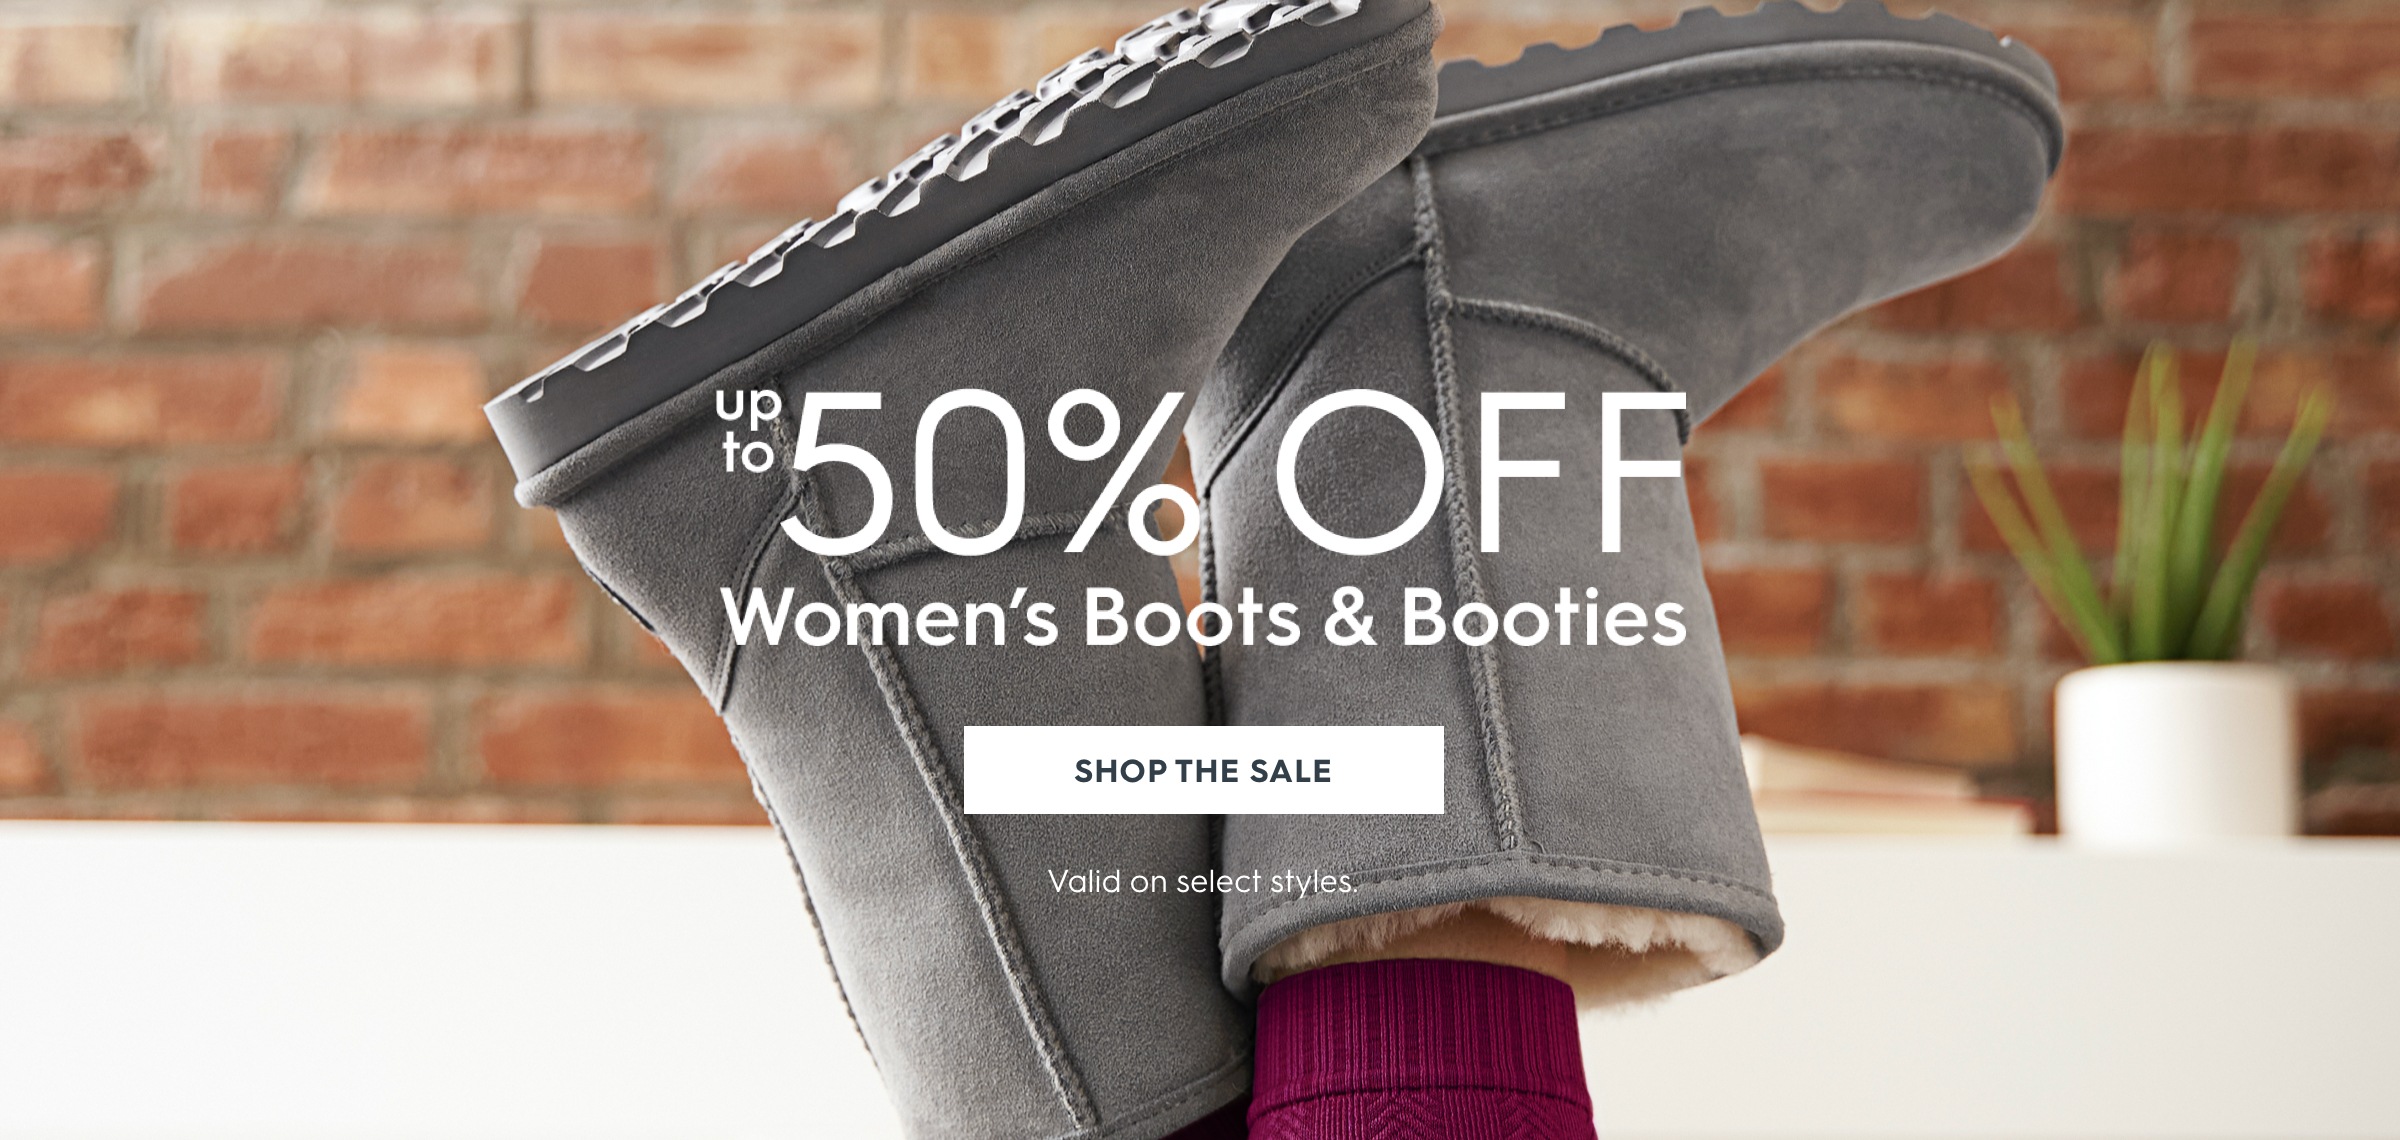 Up to 50% off women's boots & booties